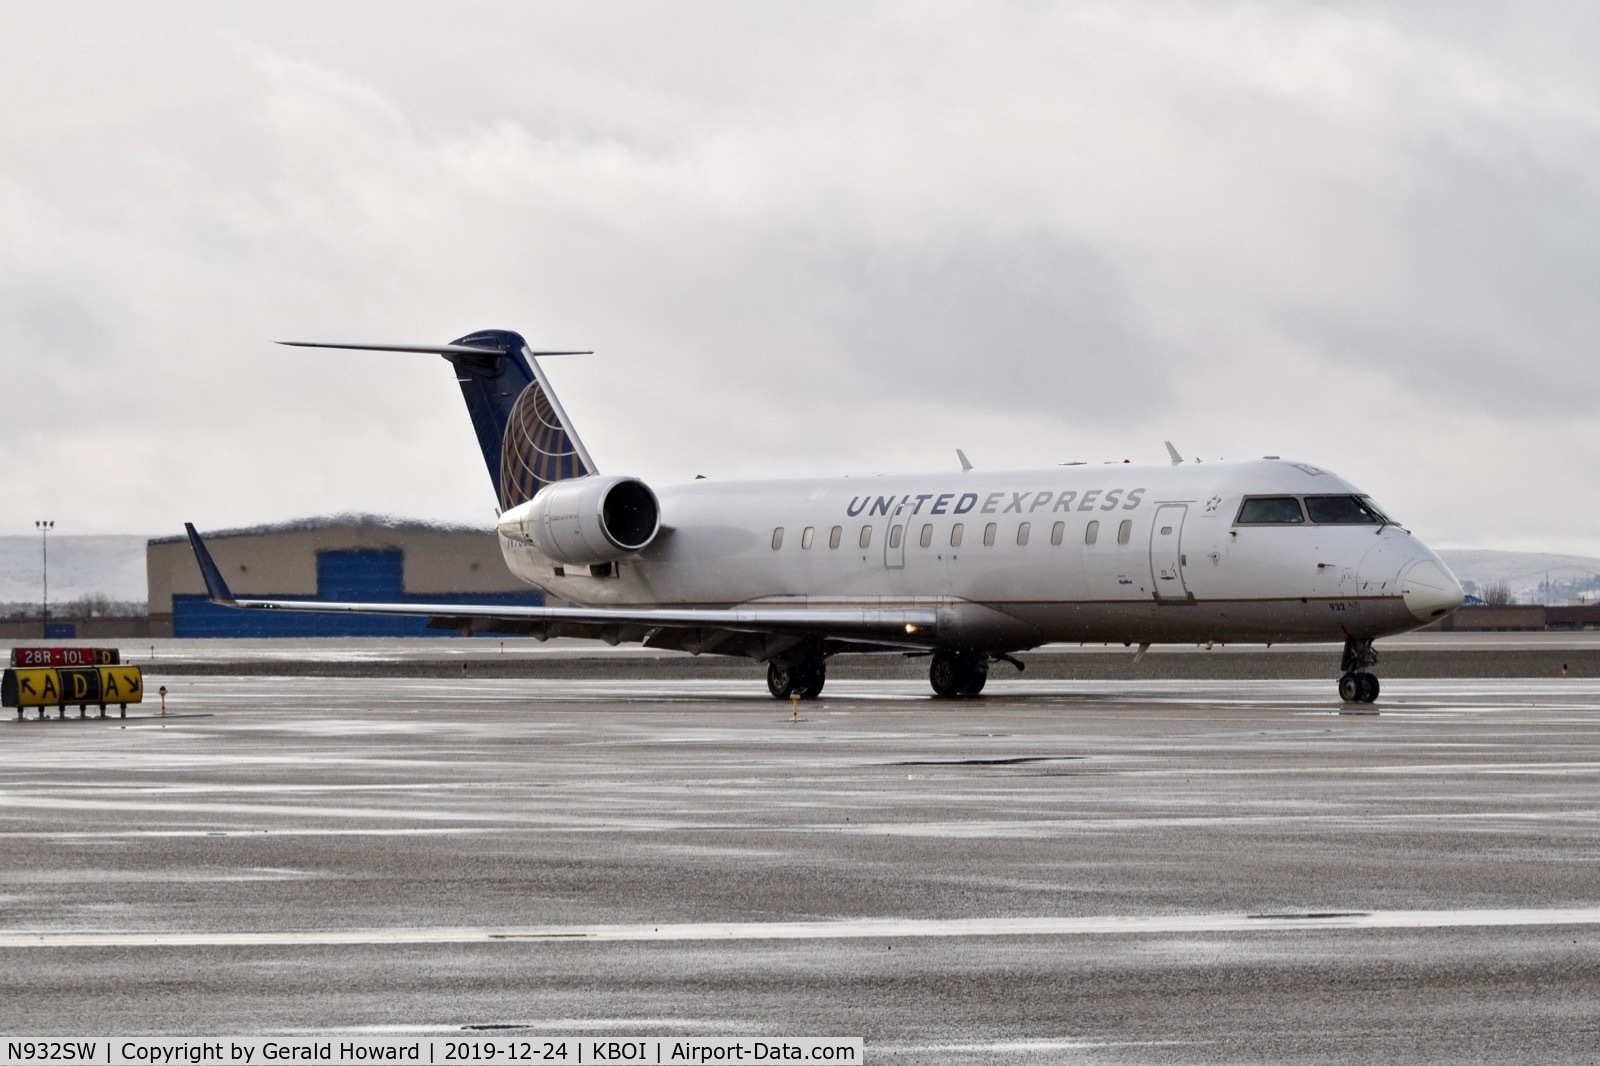 N932SW, 2002 Bombardier CRJ-200LR (CL-600-2B19) C/N 7714, Taxiing to the gate.